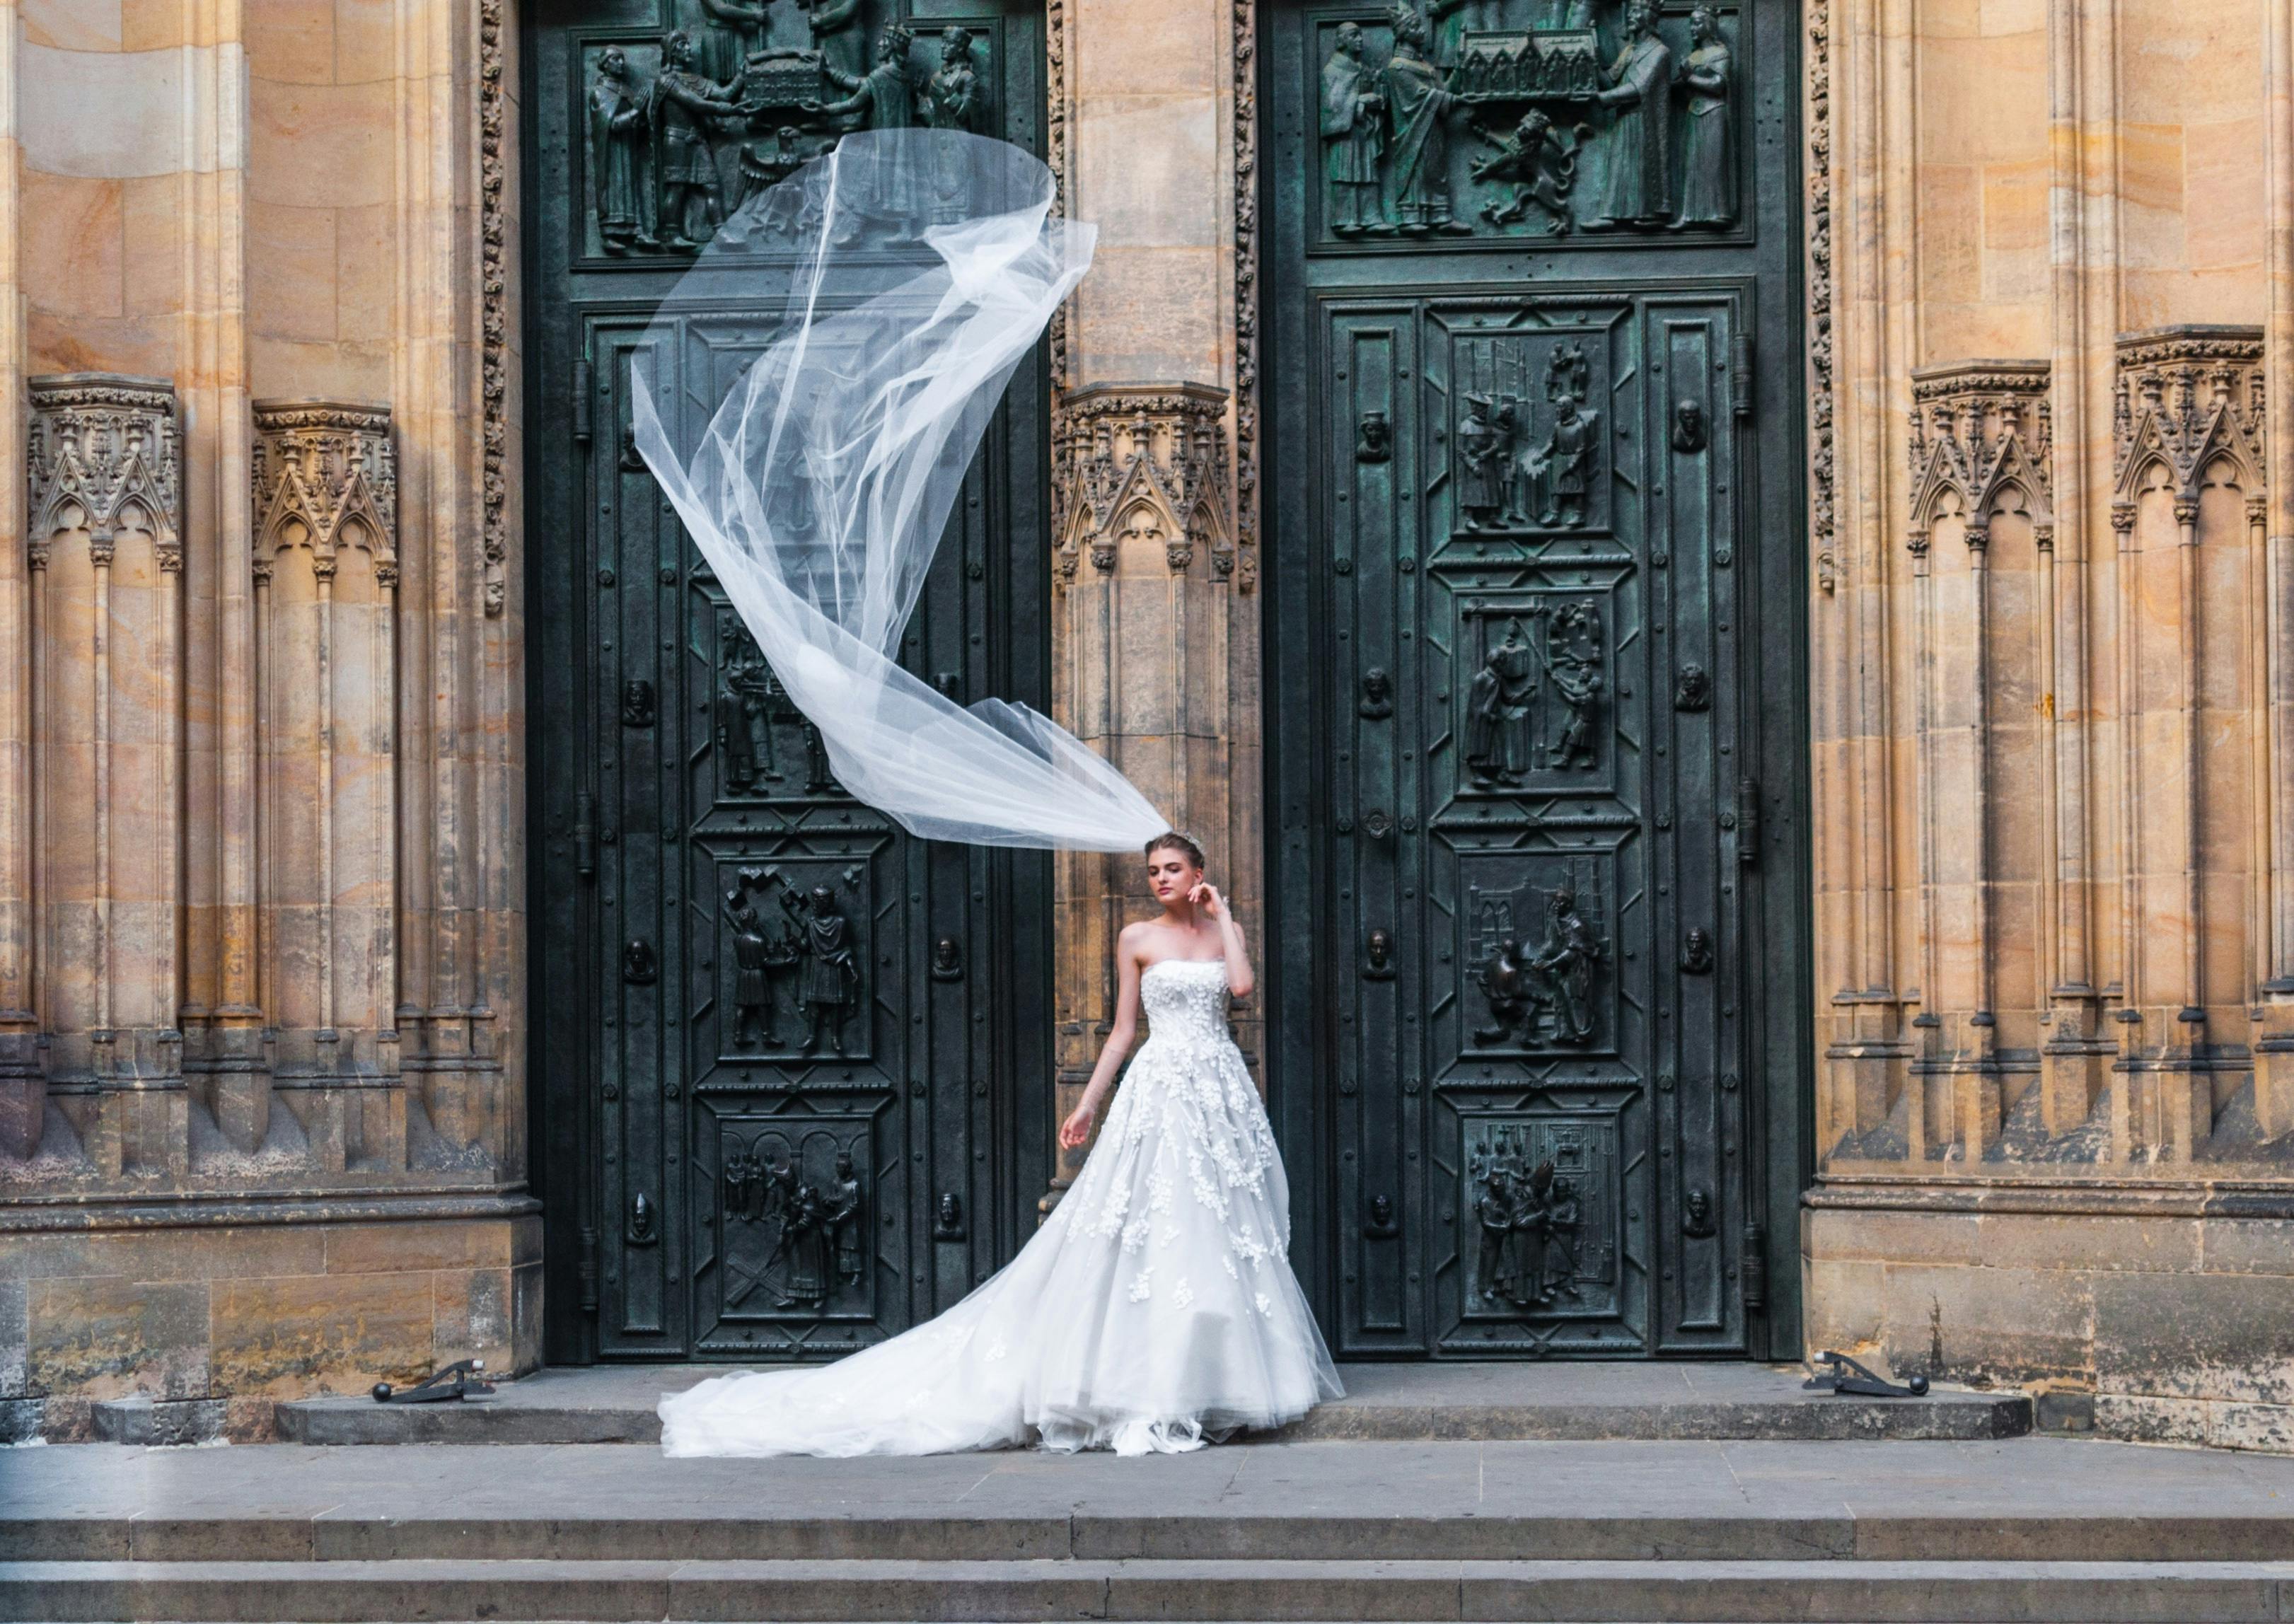 A bride standing outside closed doors | Source: Pexels